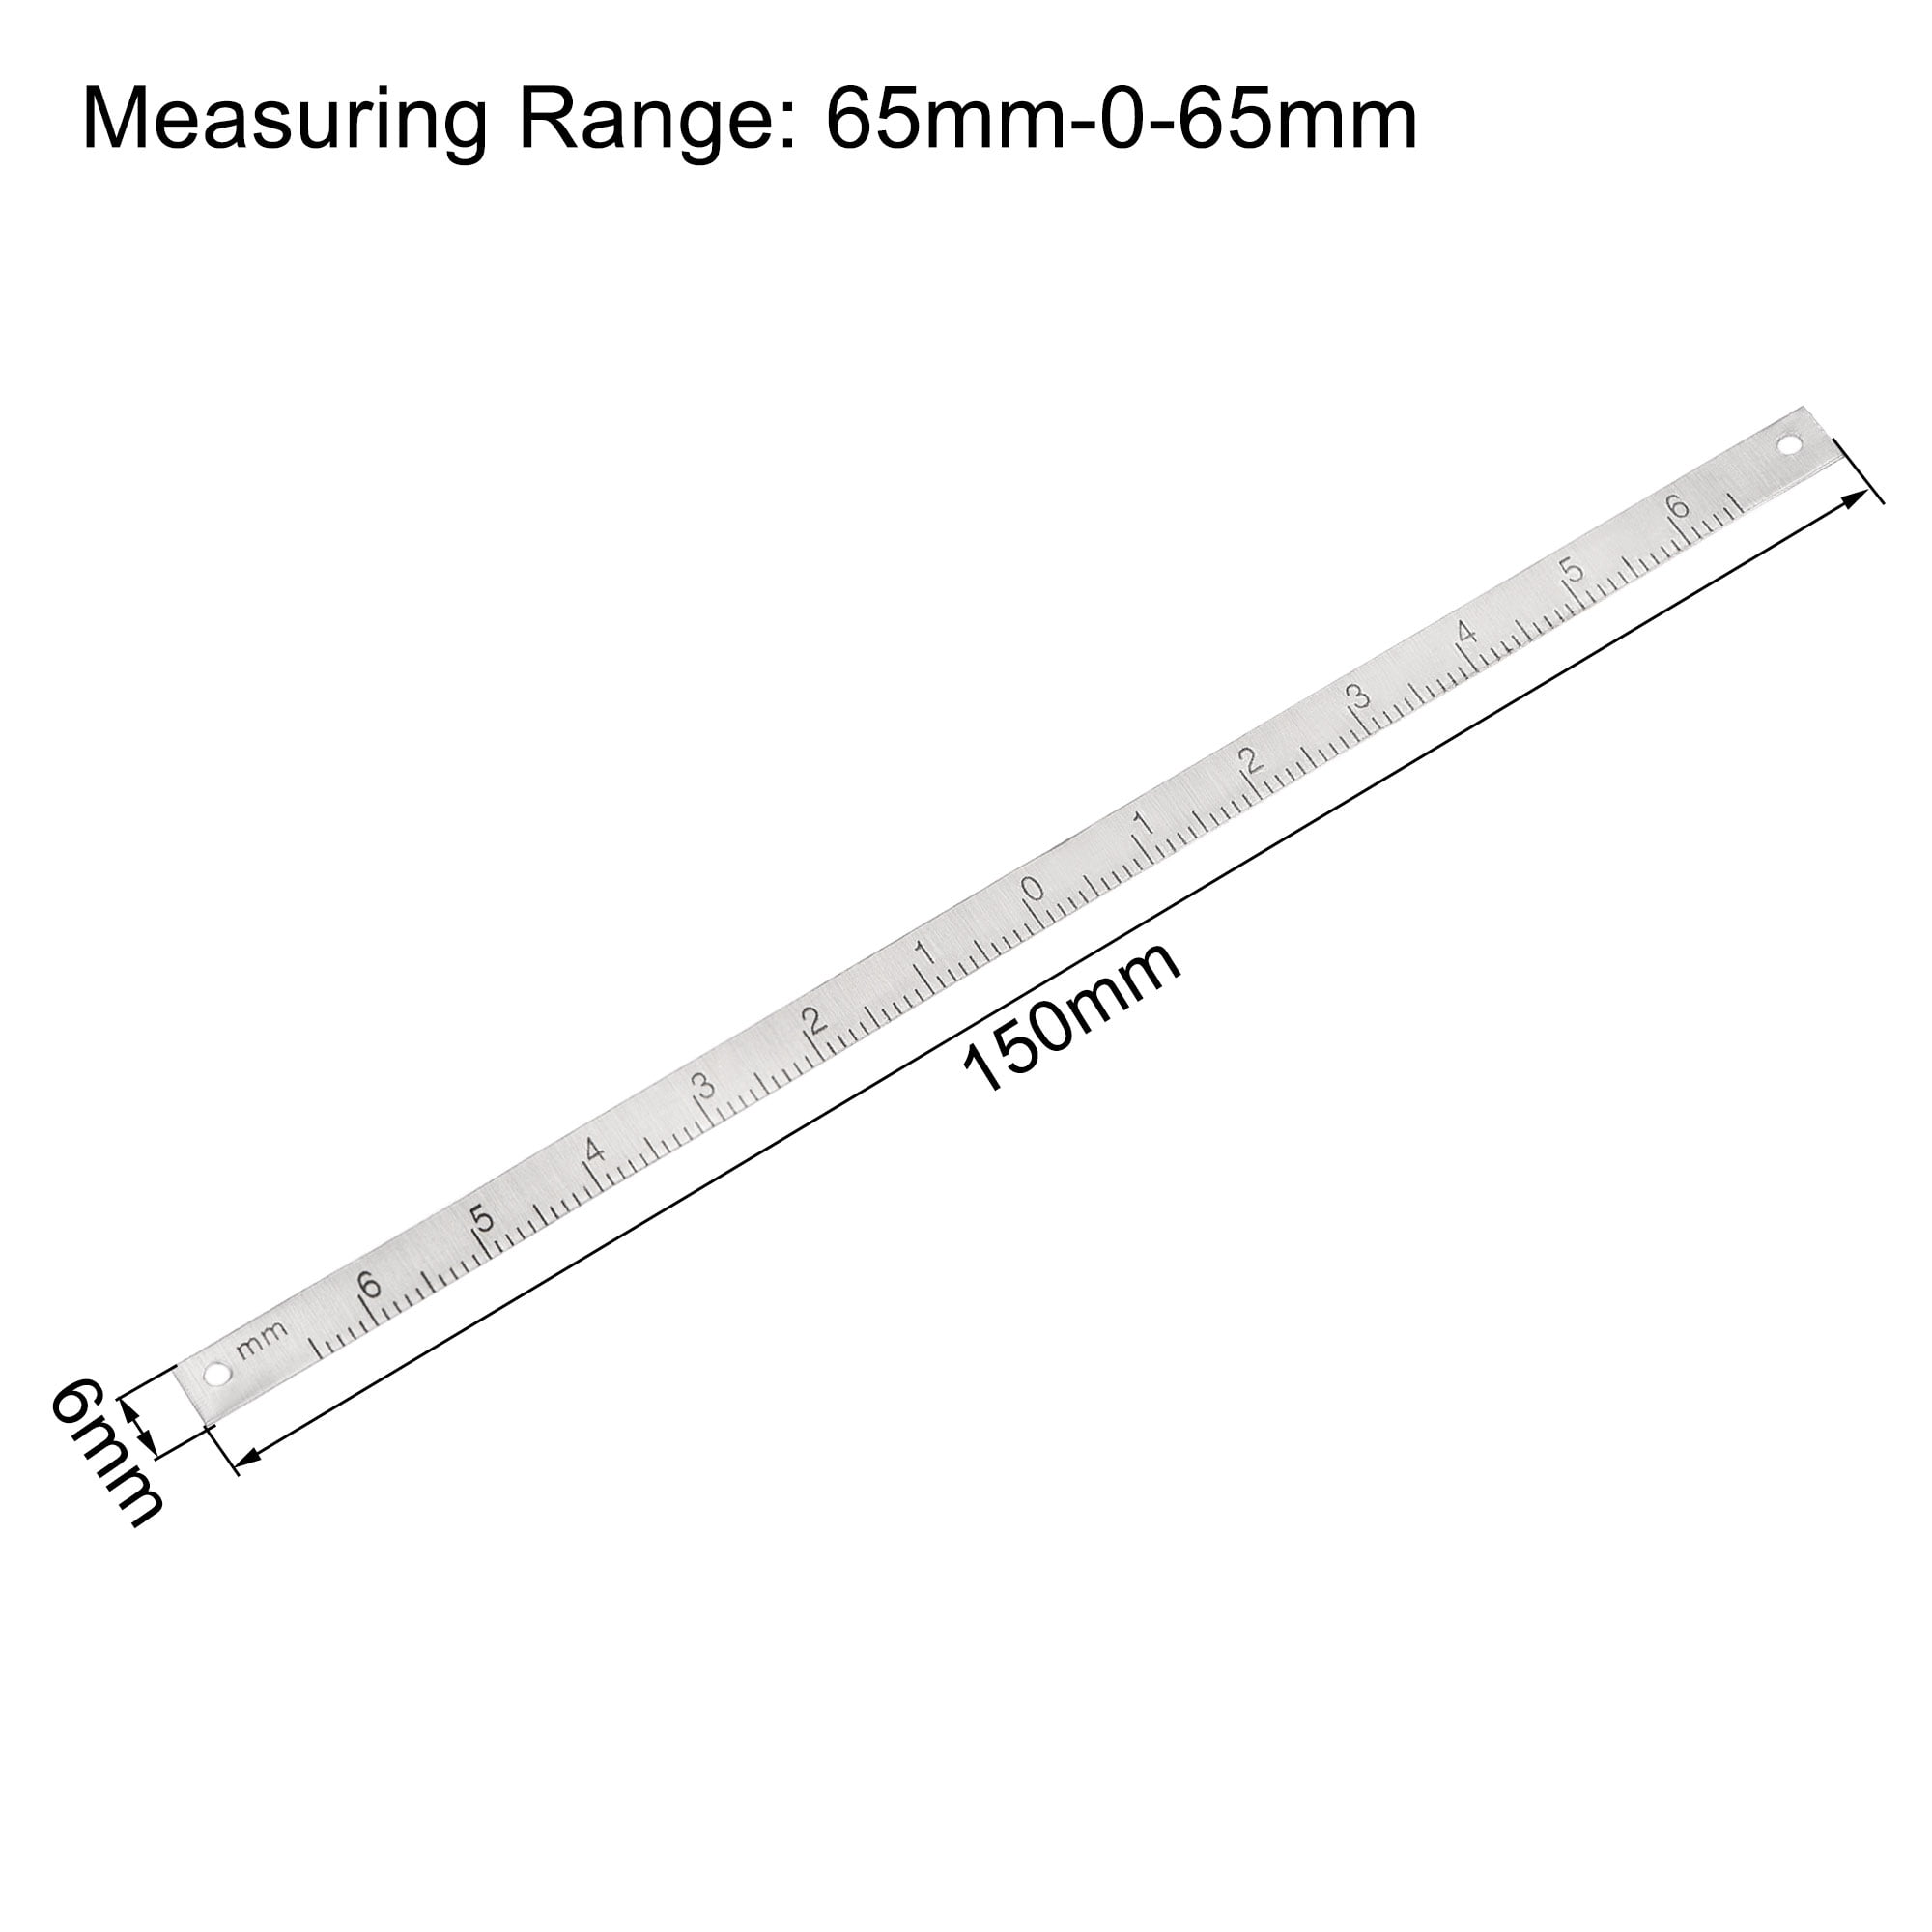 center finding ruler 65mm 0 65mm table sticky adhesive tape measure aluminum track ruler from the middle walmart com